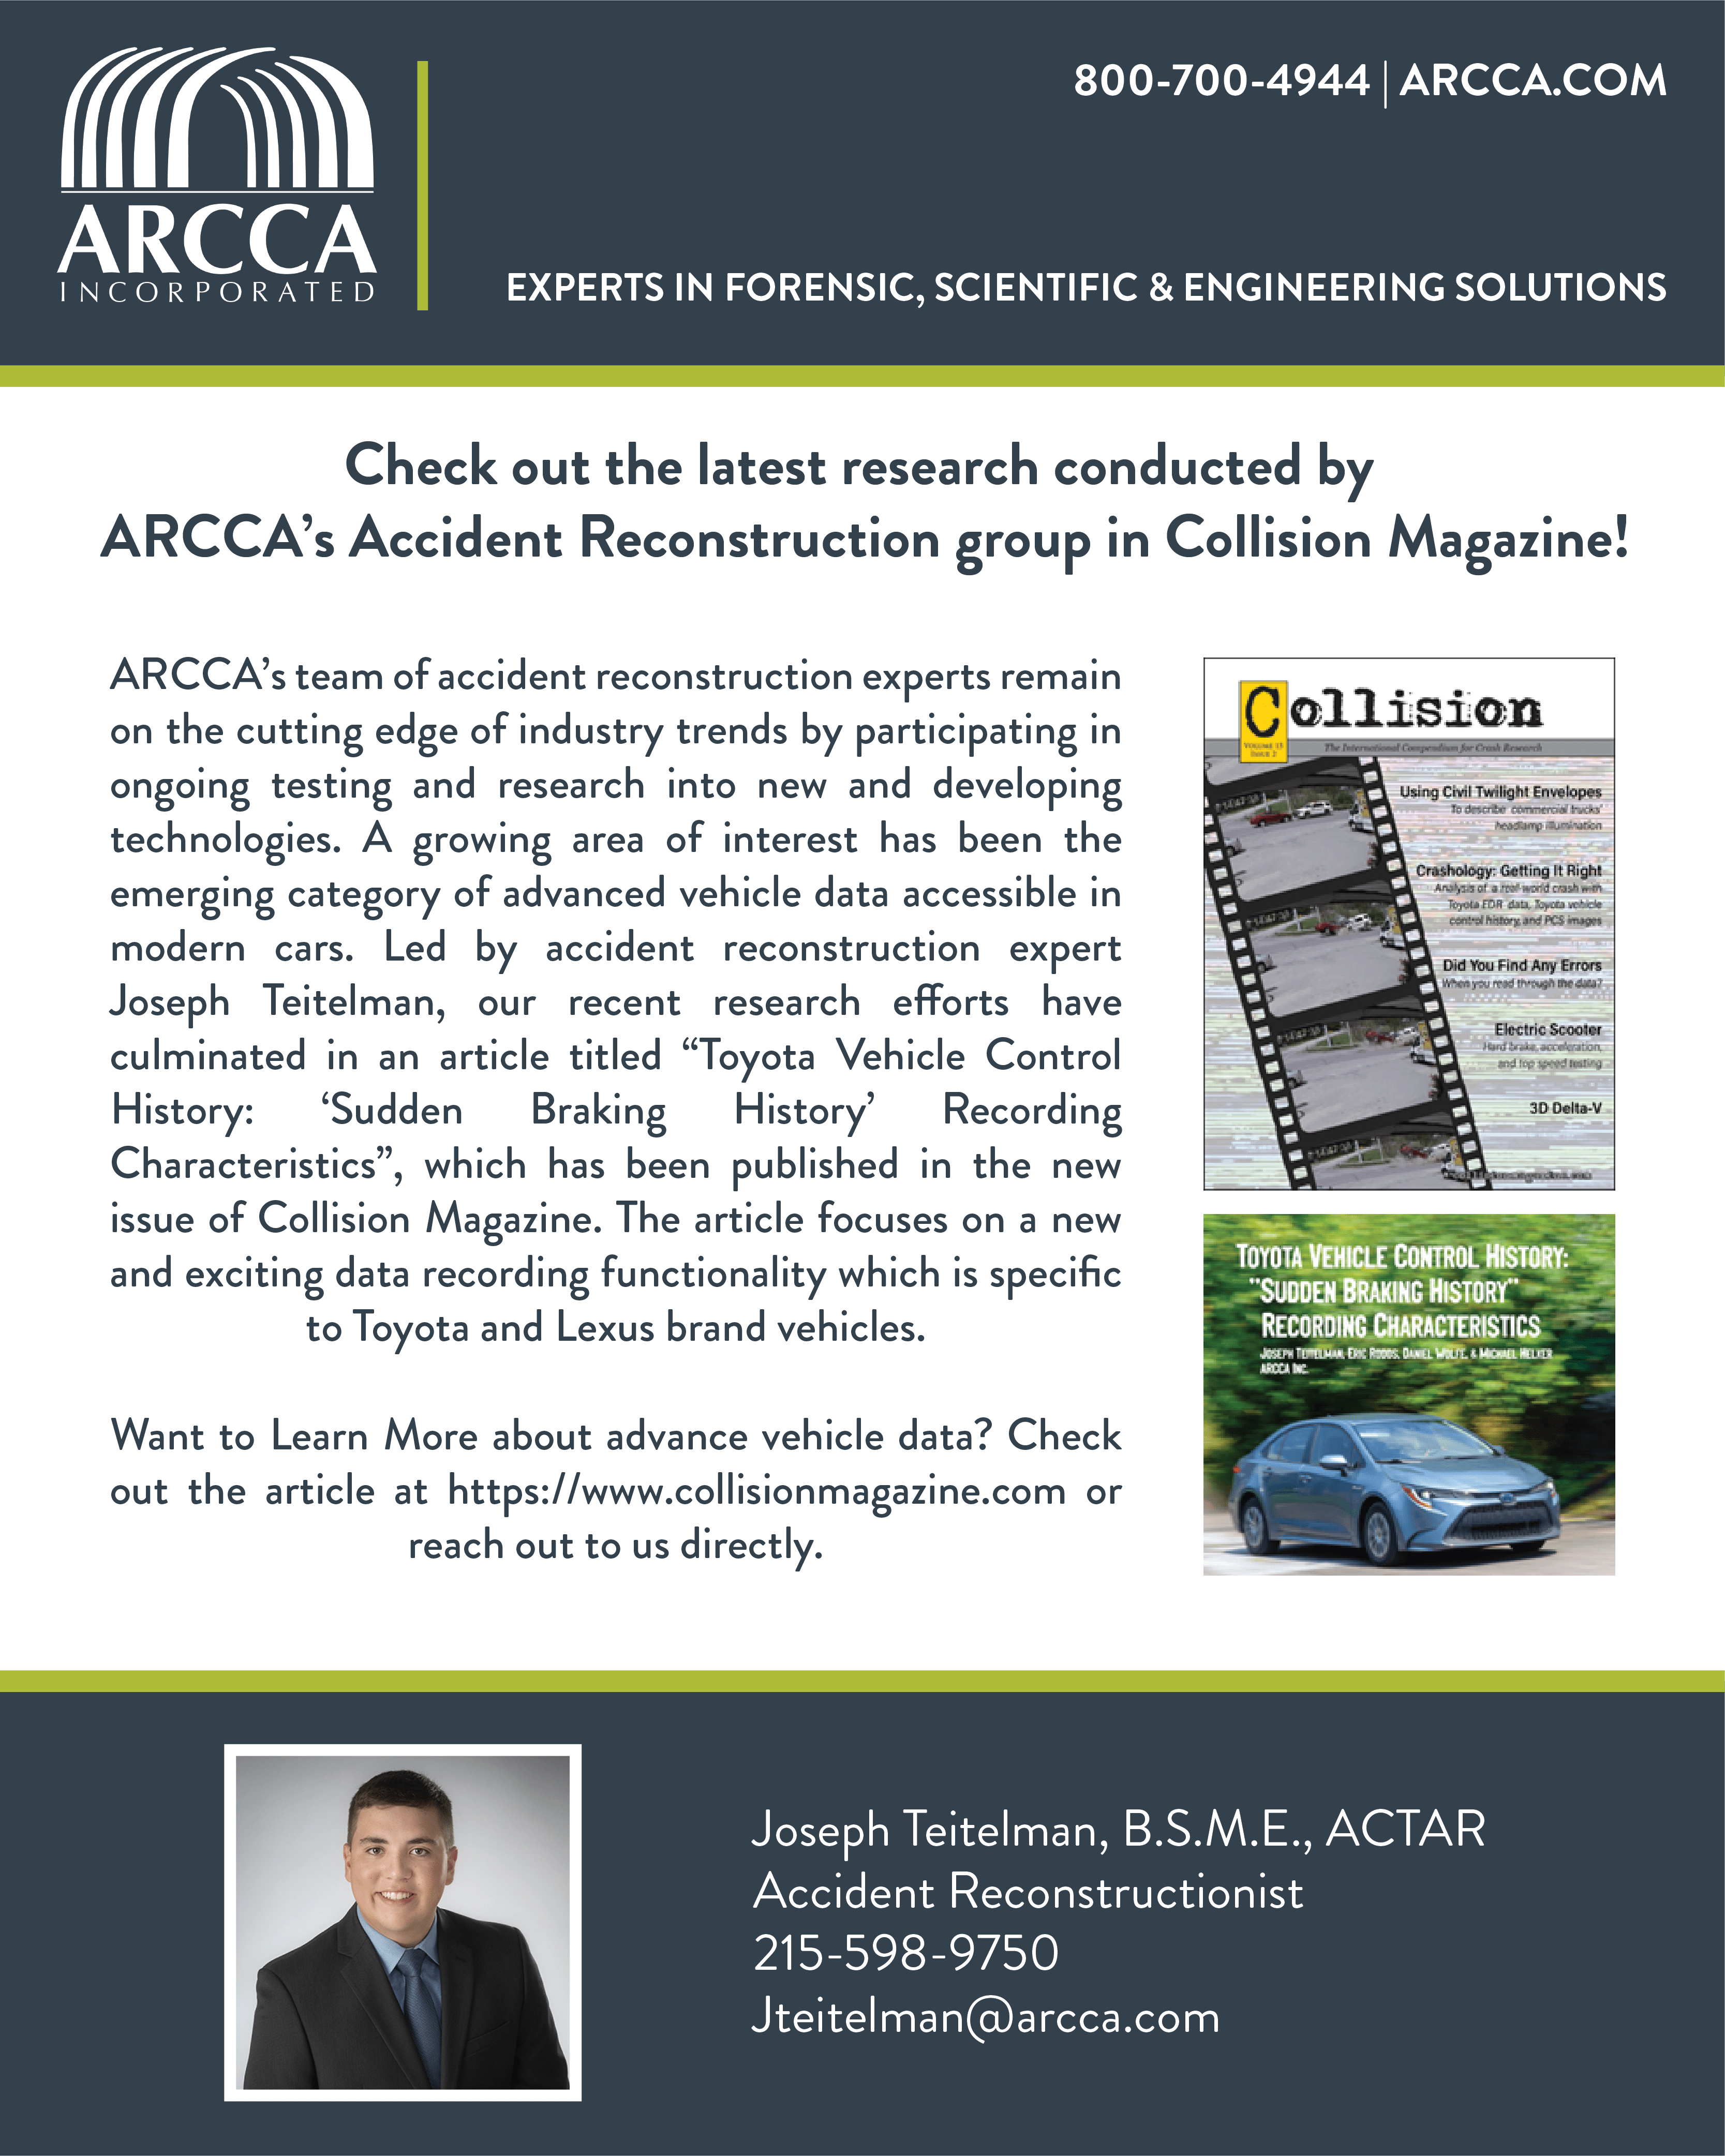 ARCCA’s Accident Reconstruction group in Collision Magazine